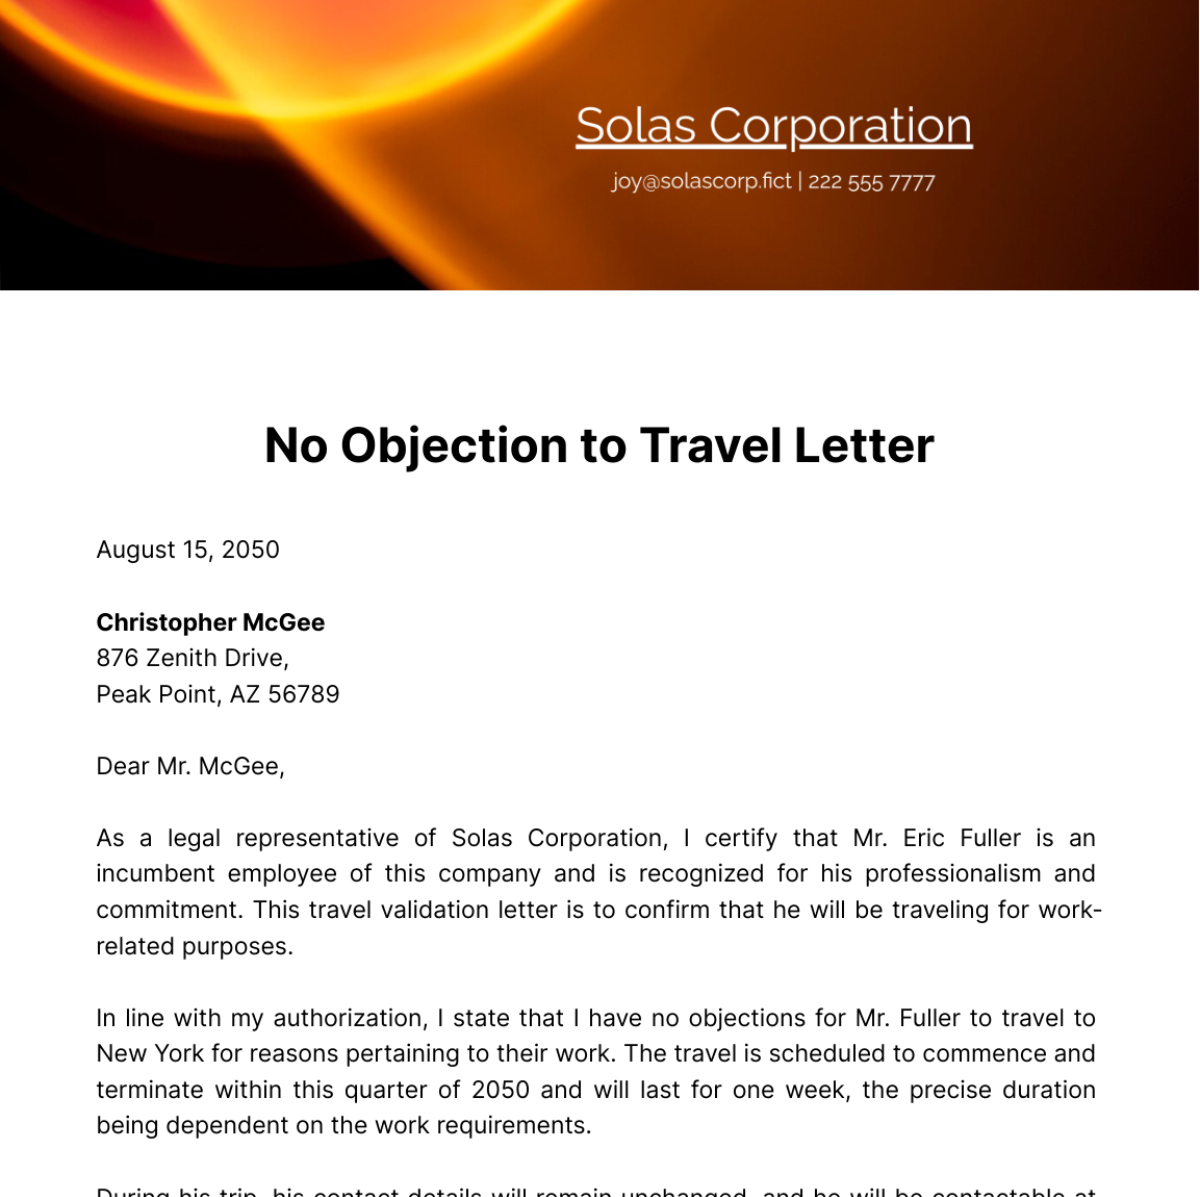 No Objection to Travel Letter Template